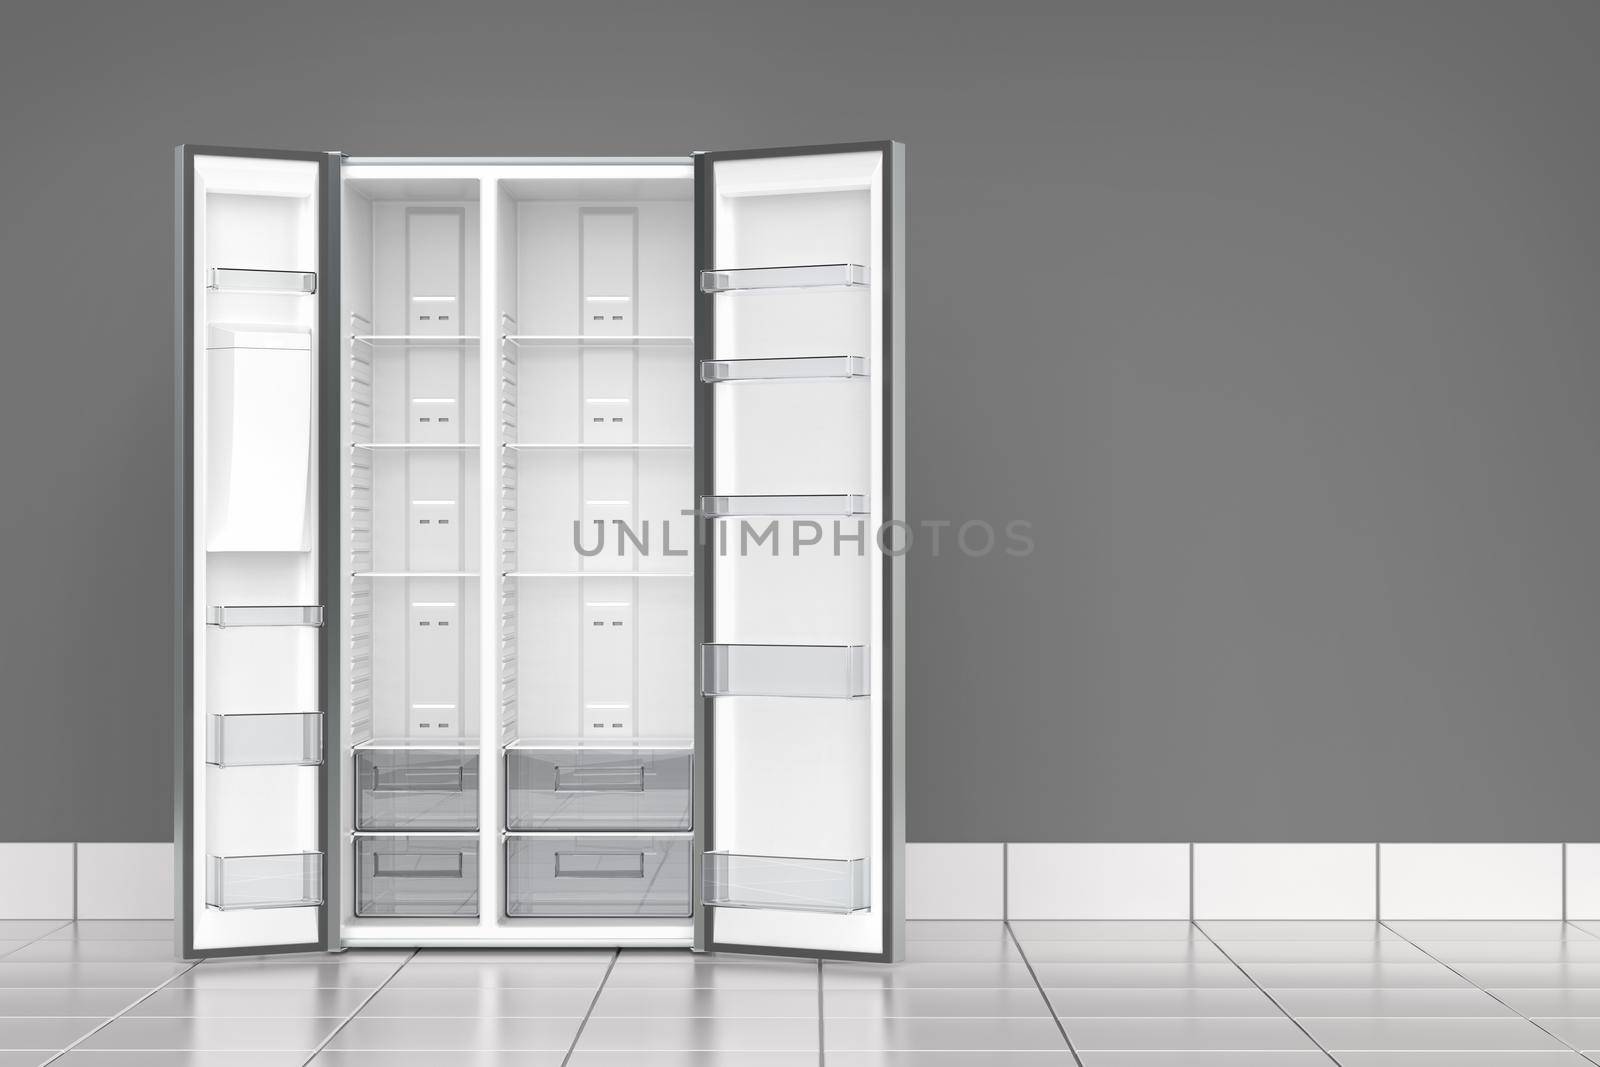 Empty side-by-side refrigerator by magraphics